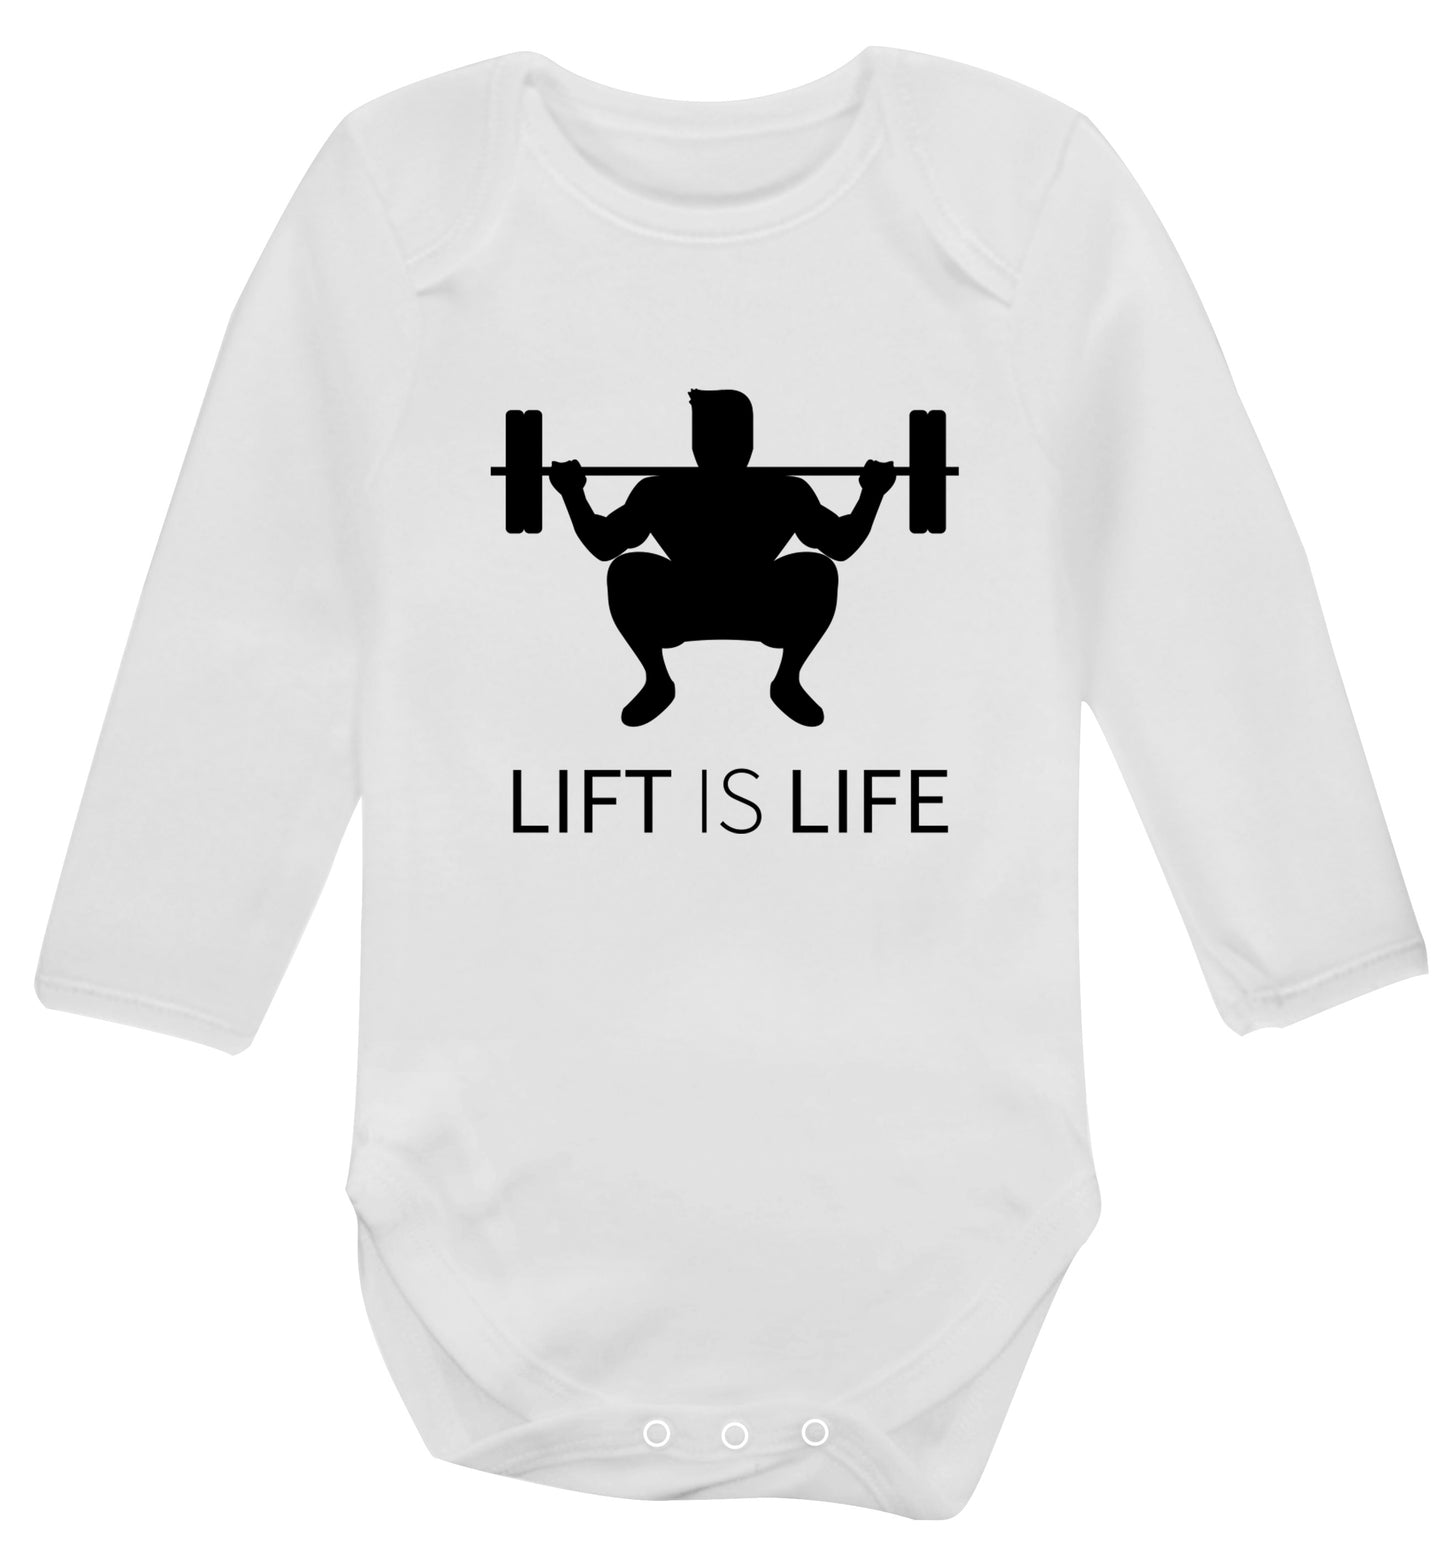 Lift is life Baby Vest long sleeved white 6-12 months